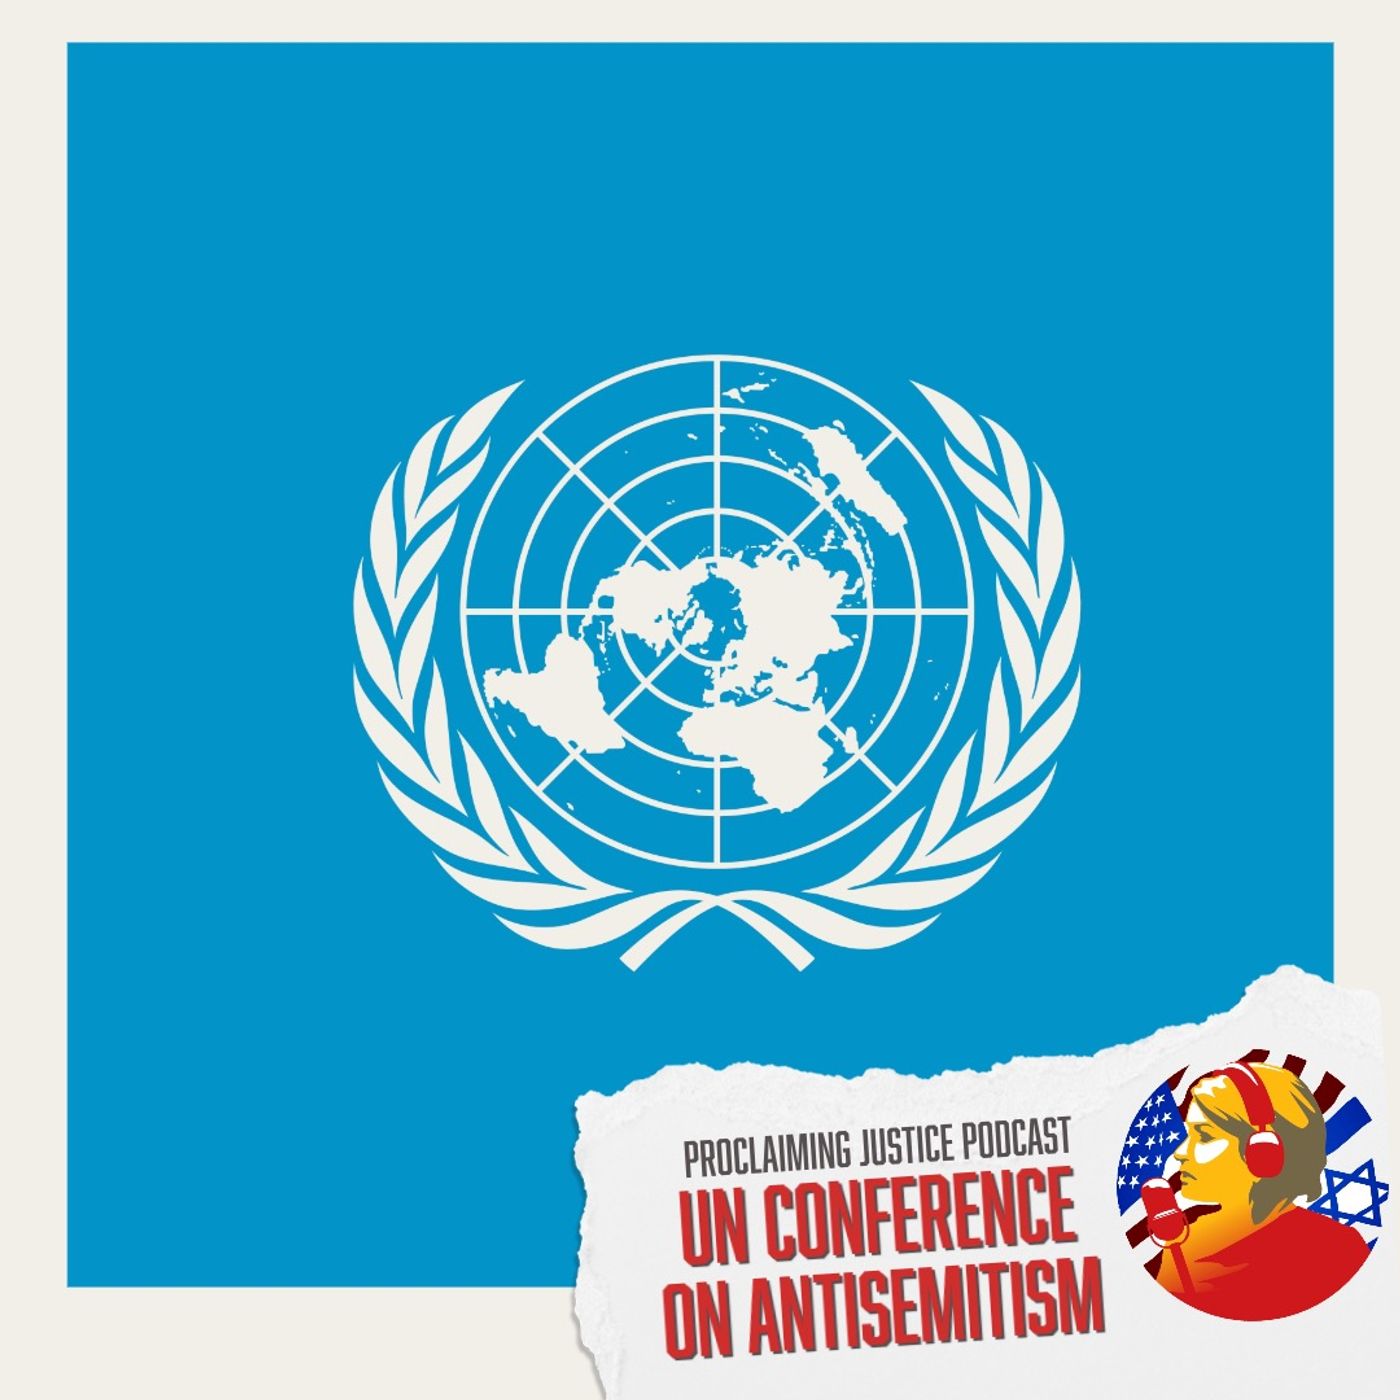 UN Conference on Antisemitism and the continued growth of Antisemitism